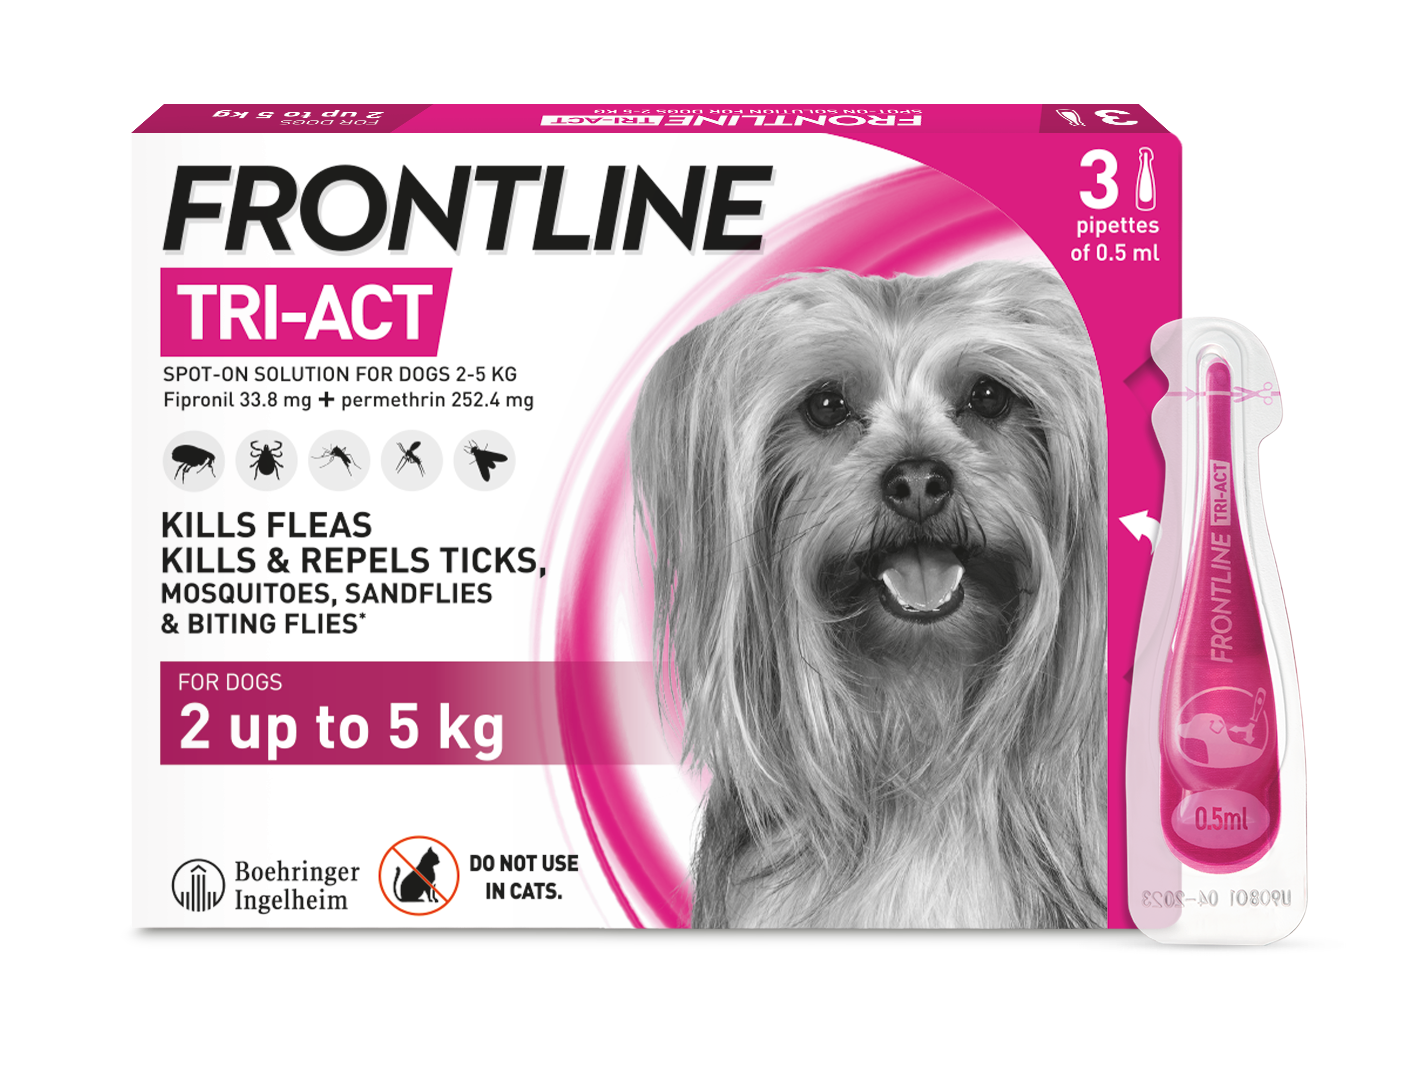 FRONTLINE TRI-ACT FOR DOGS